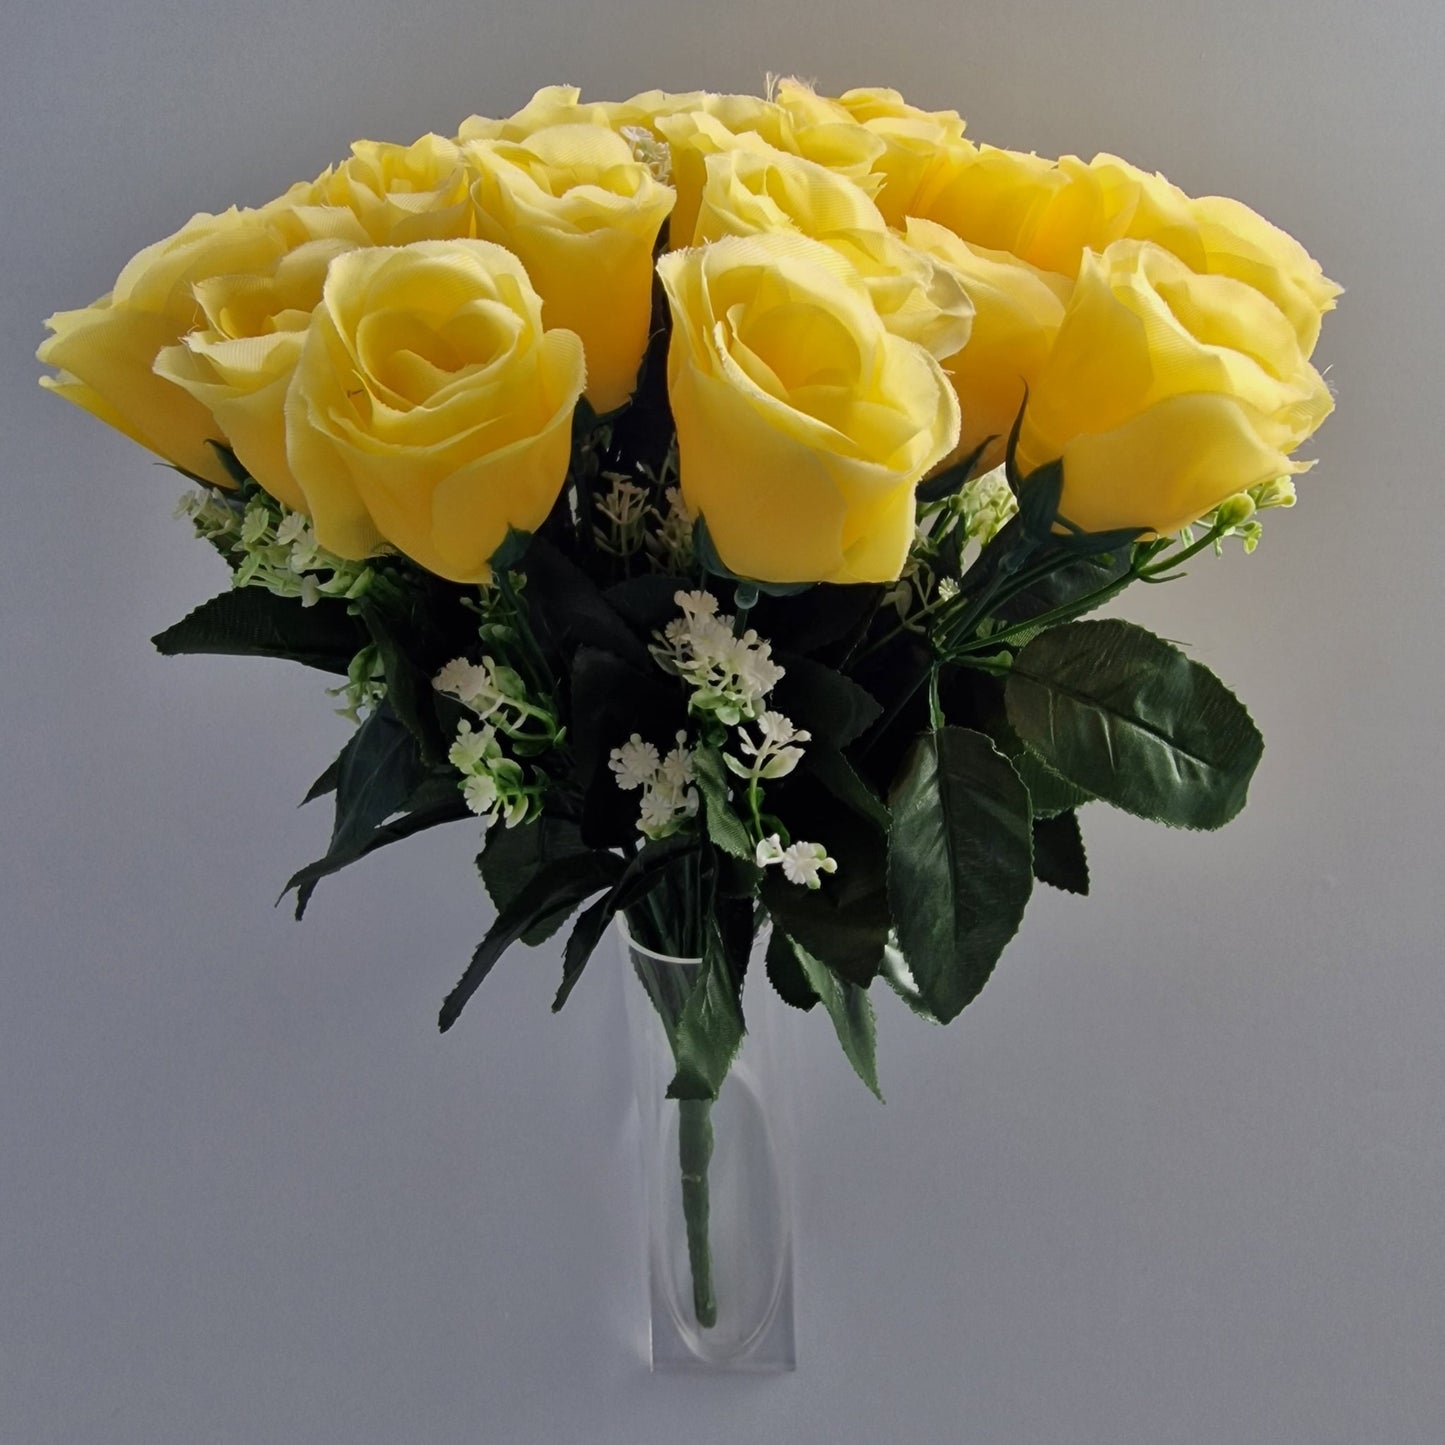 24 Head Large Rose Bouquet in Yellow - Amor Flowers